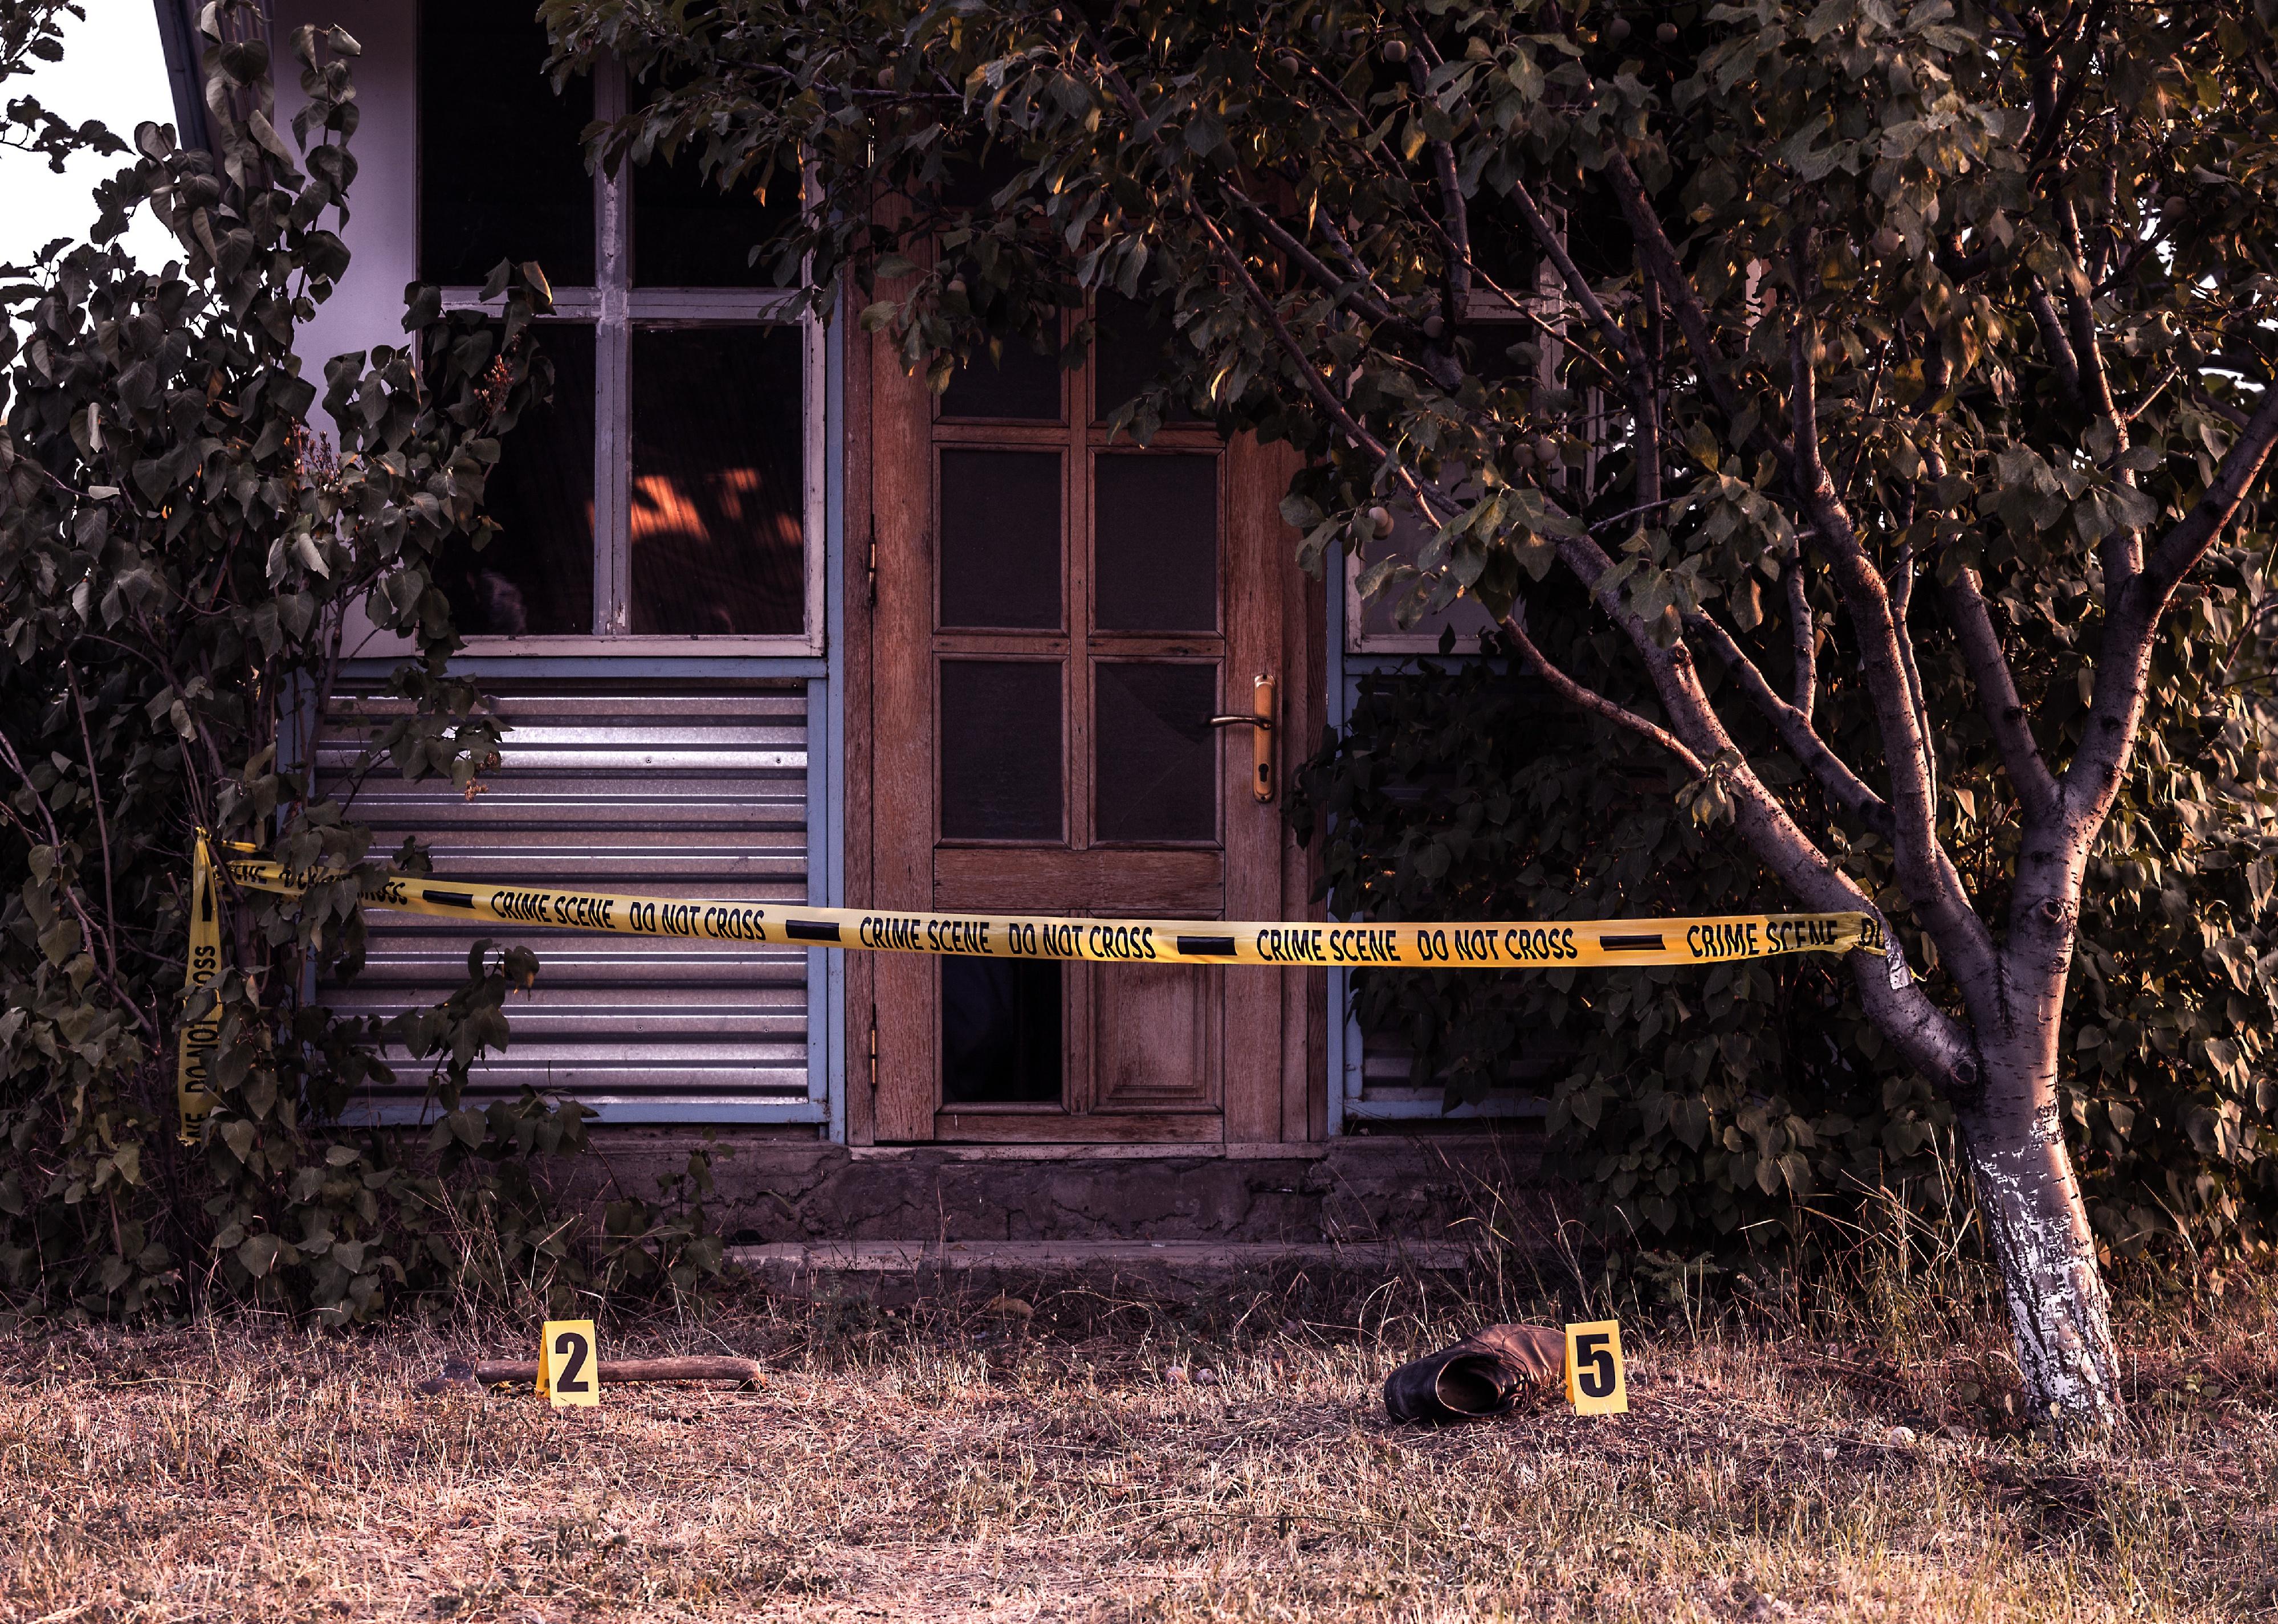 Crime scene tape in front of a house.